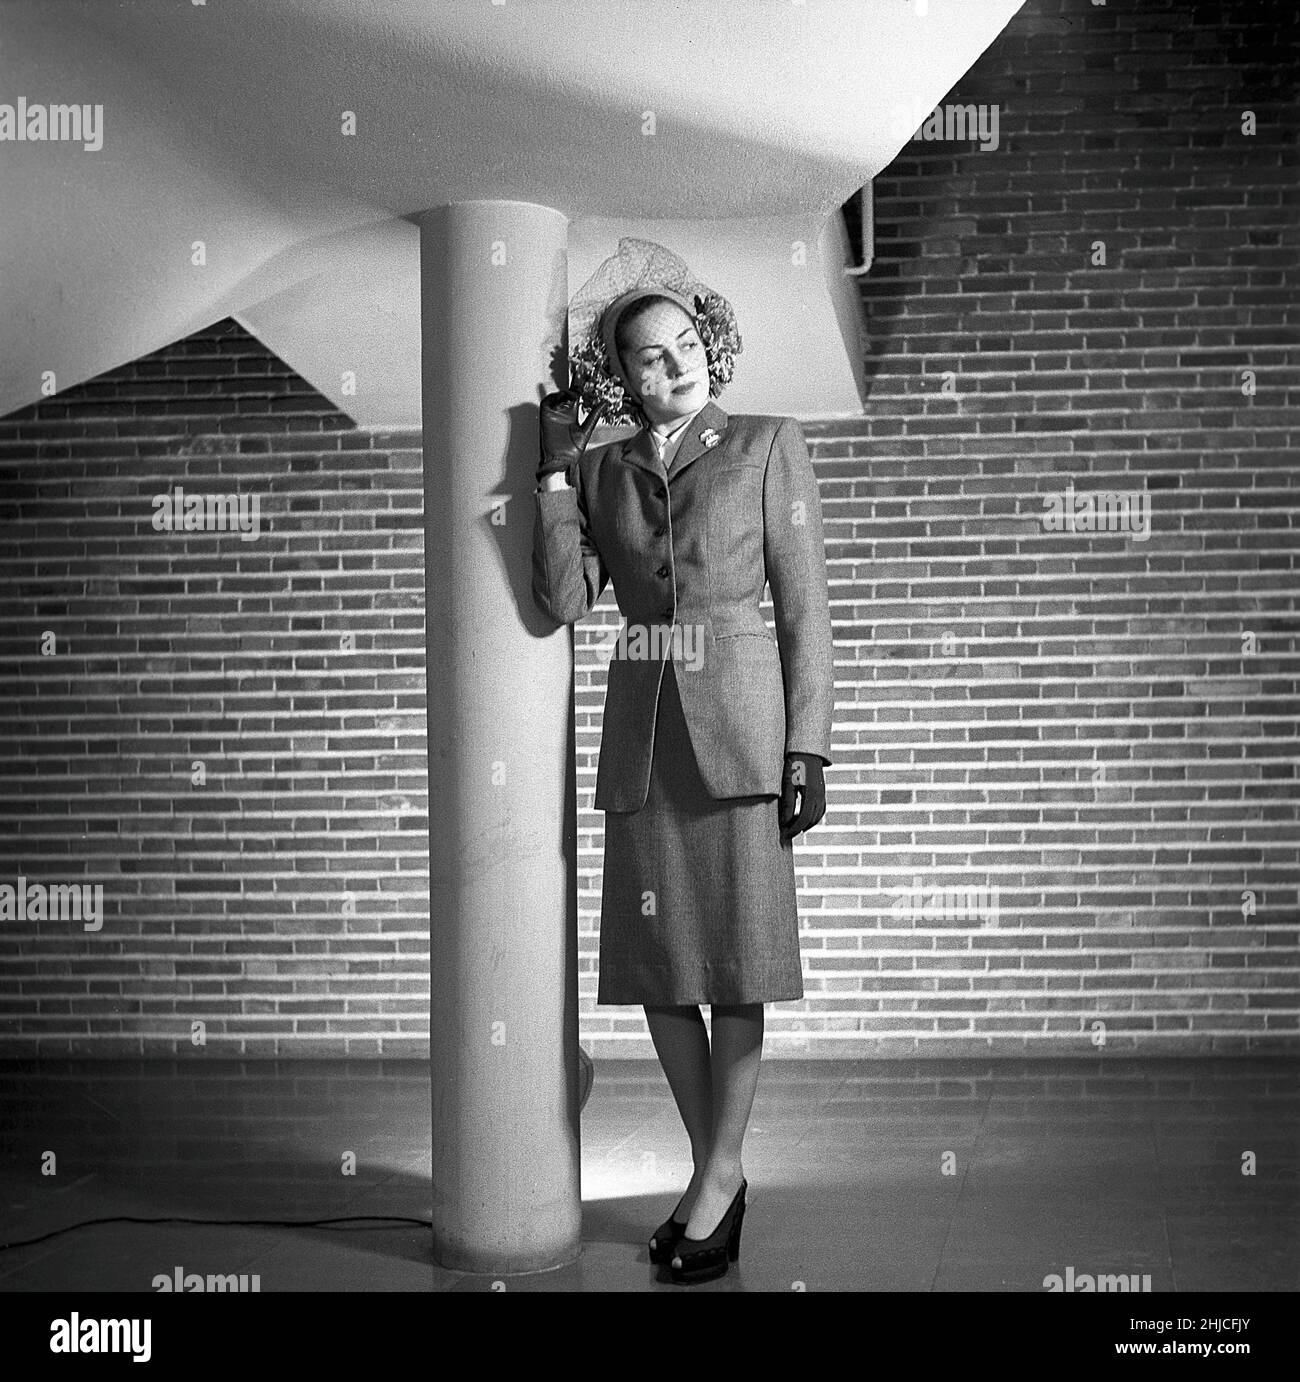 Women's fashion in the 1940s. A young woman in a typical 1940s outfit with a matching skirt and jacket. Sweden 1946 Kristoffersson Ref Y69-3 Stock Photo